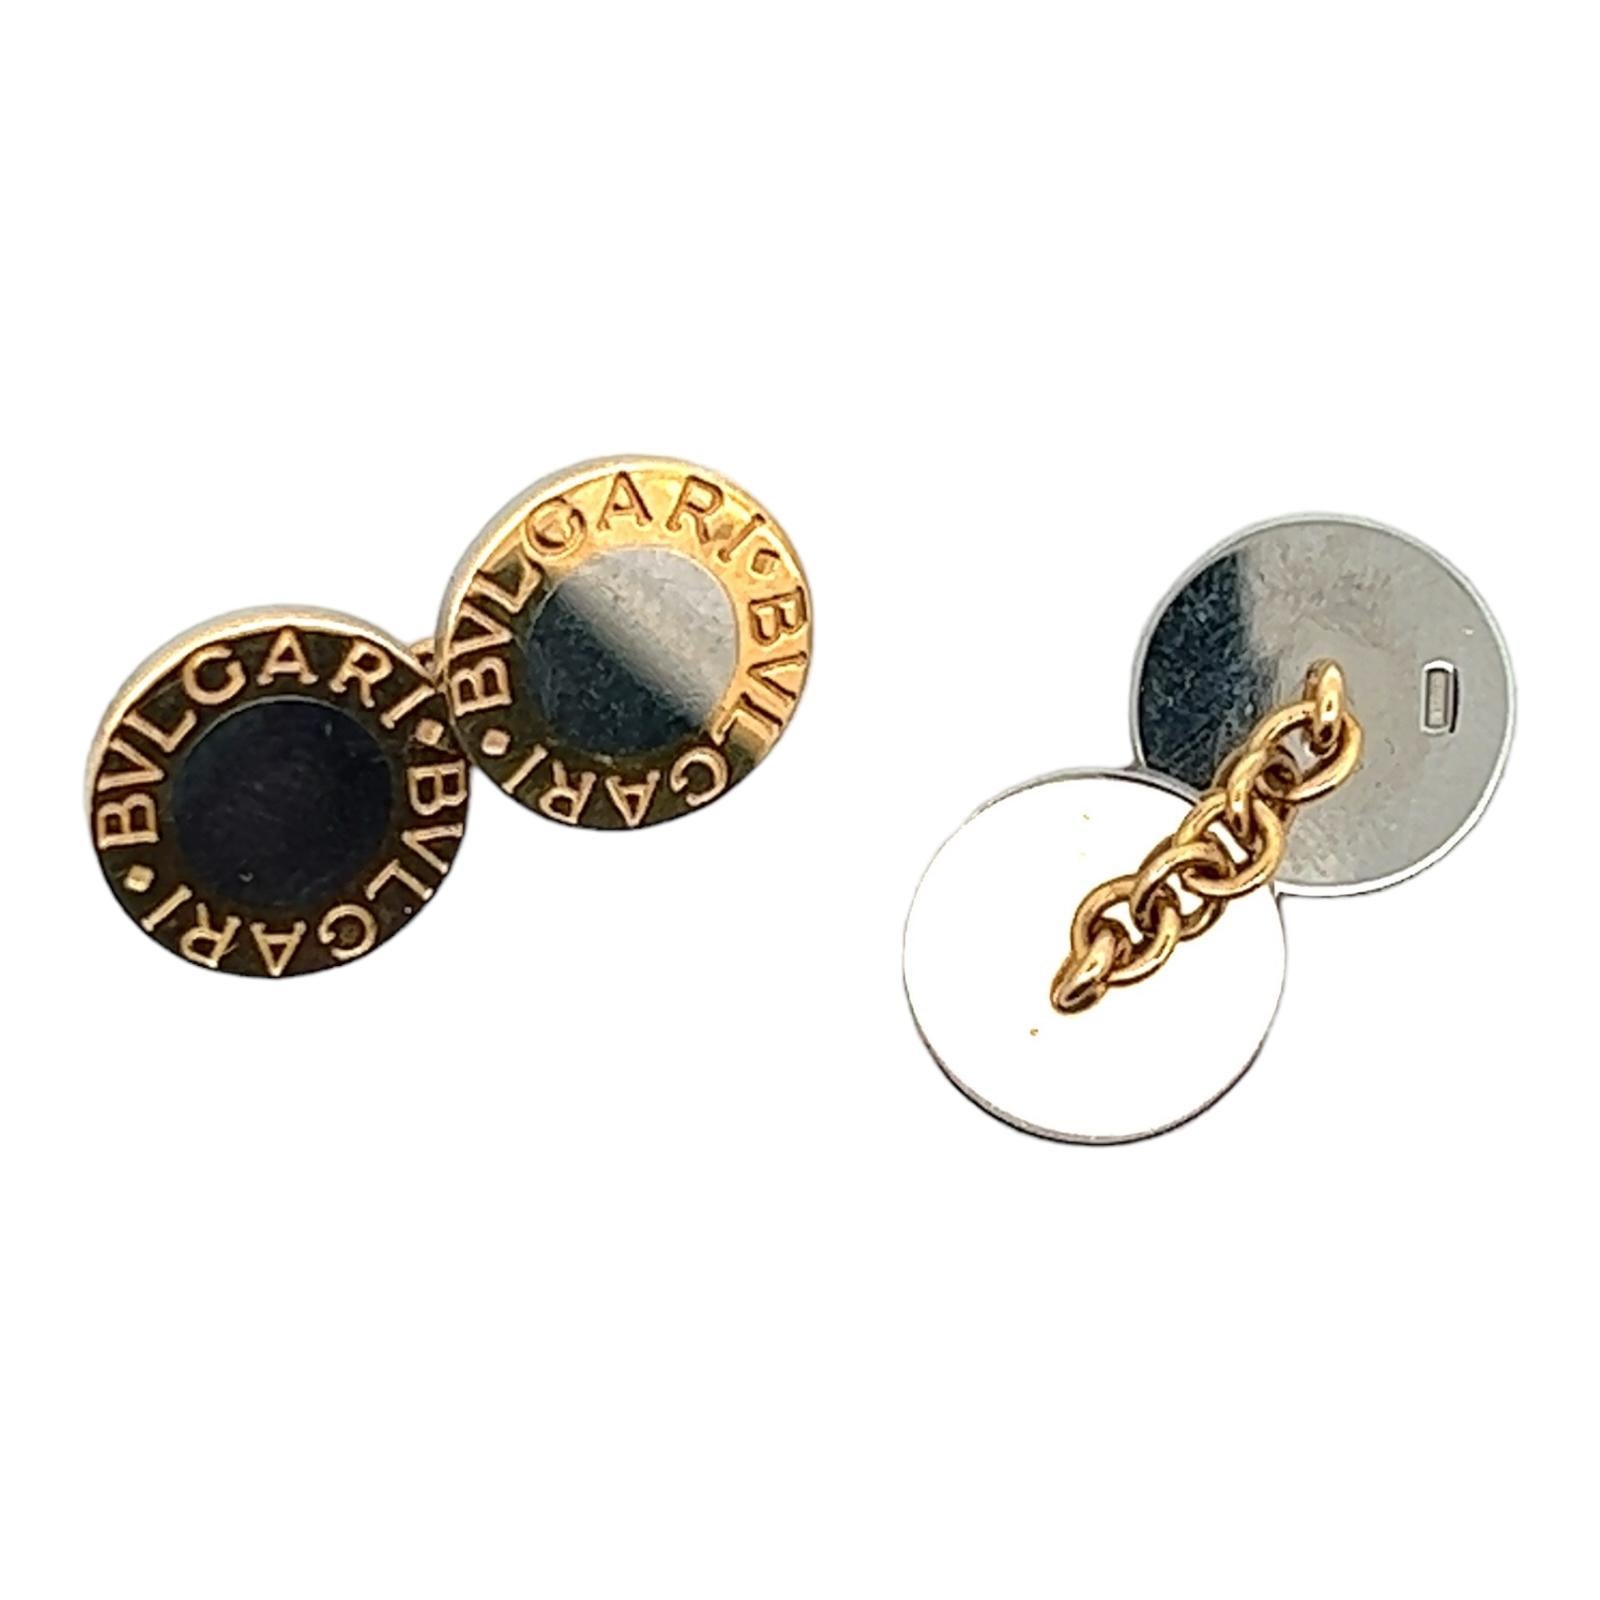 Iconic Bvlgari men's cufflinks crafted in 18 karat yellow gold and stainless steel. The chain cufflinks measure 13 x 13 mm and come in original Bvlgari box. 